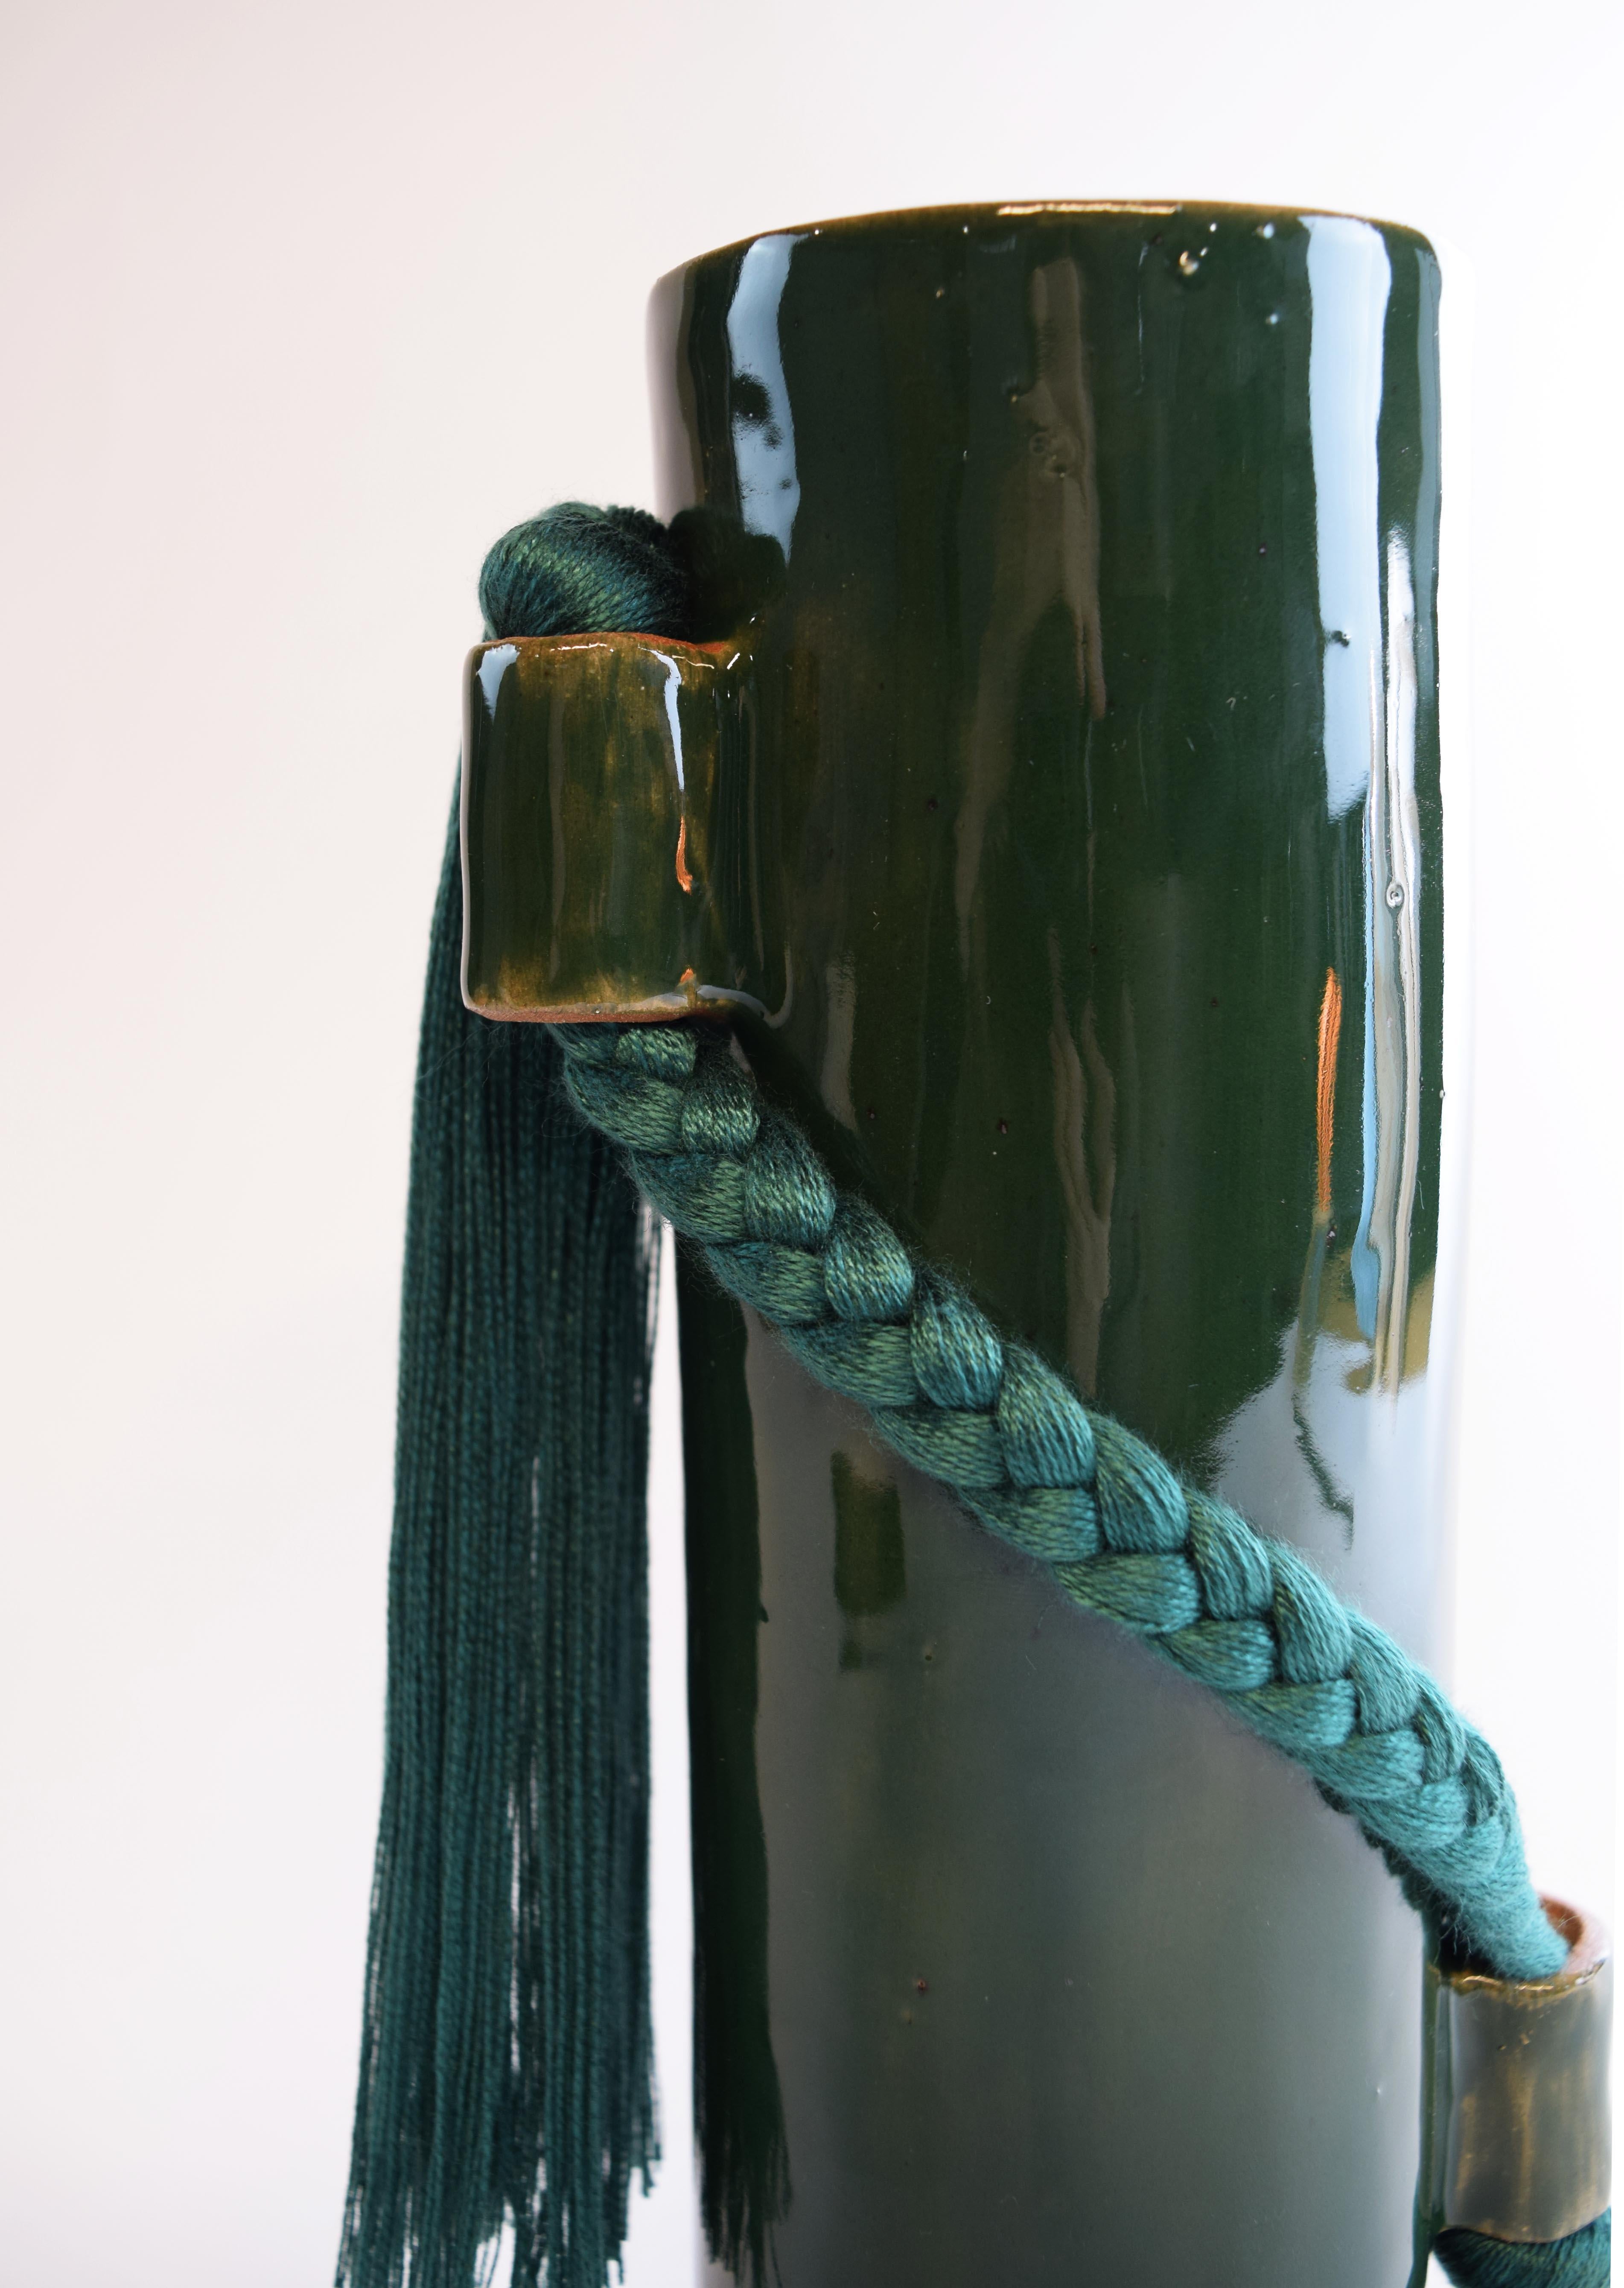 American Handmade Ceramic Vase #695 in Dark Green with Green Tencel Braid and Fringe For Sale